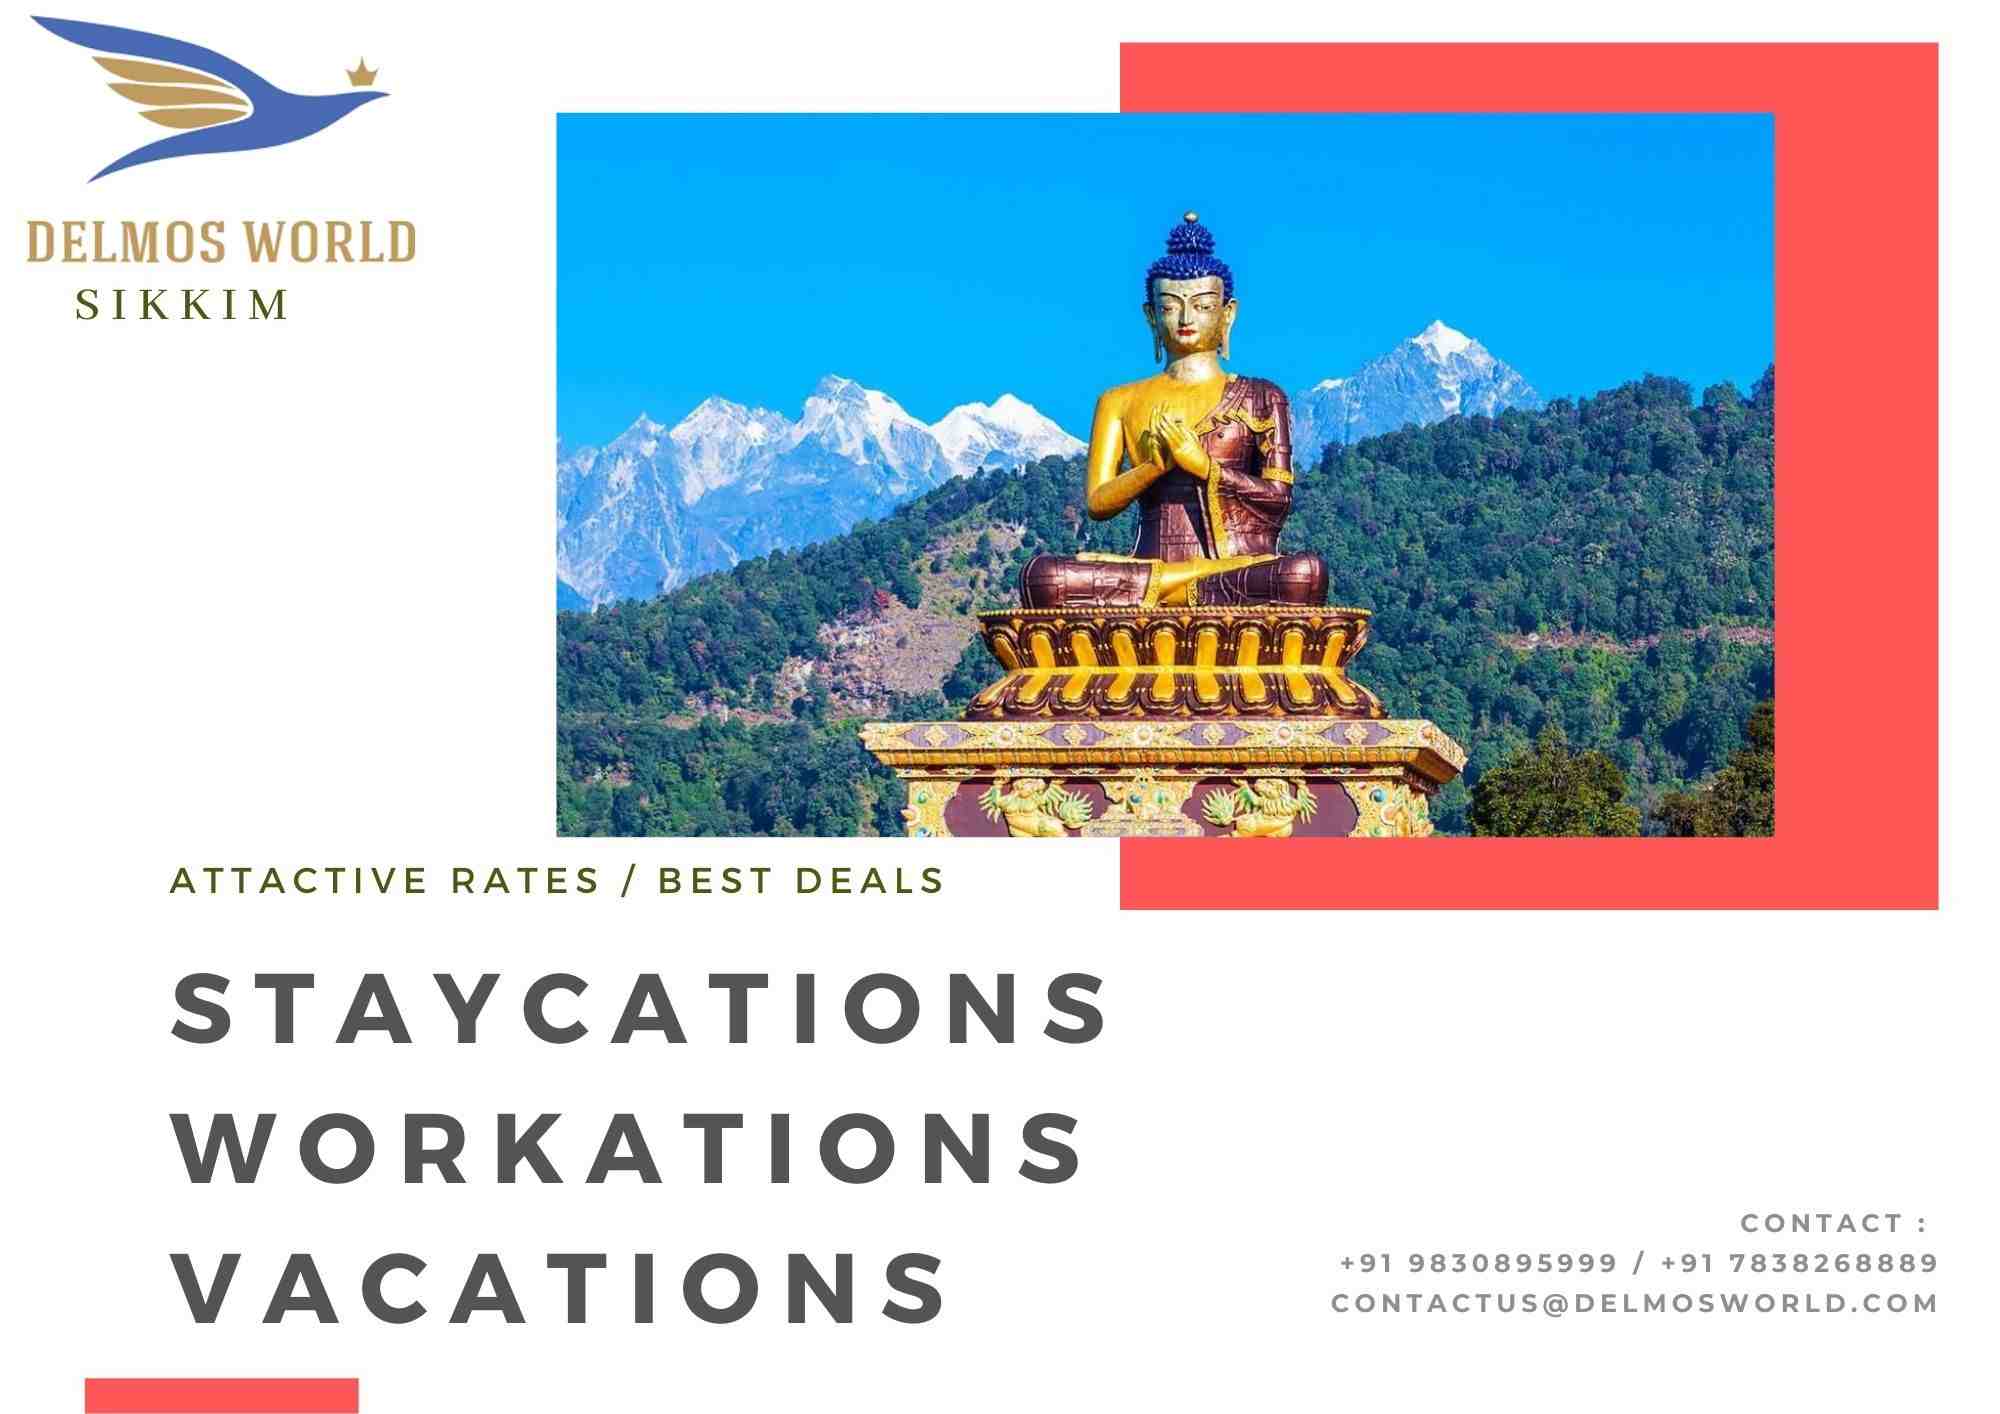 Sikkim - Staycations - Workations - Vacations